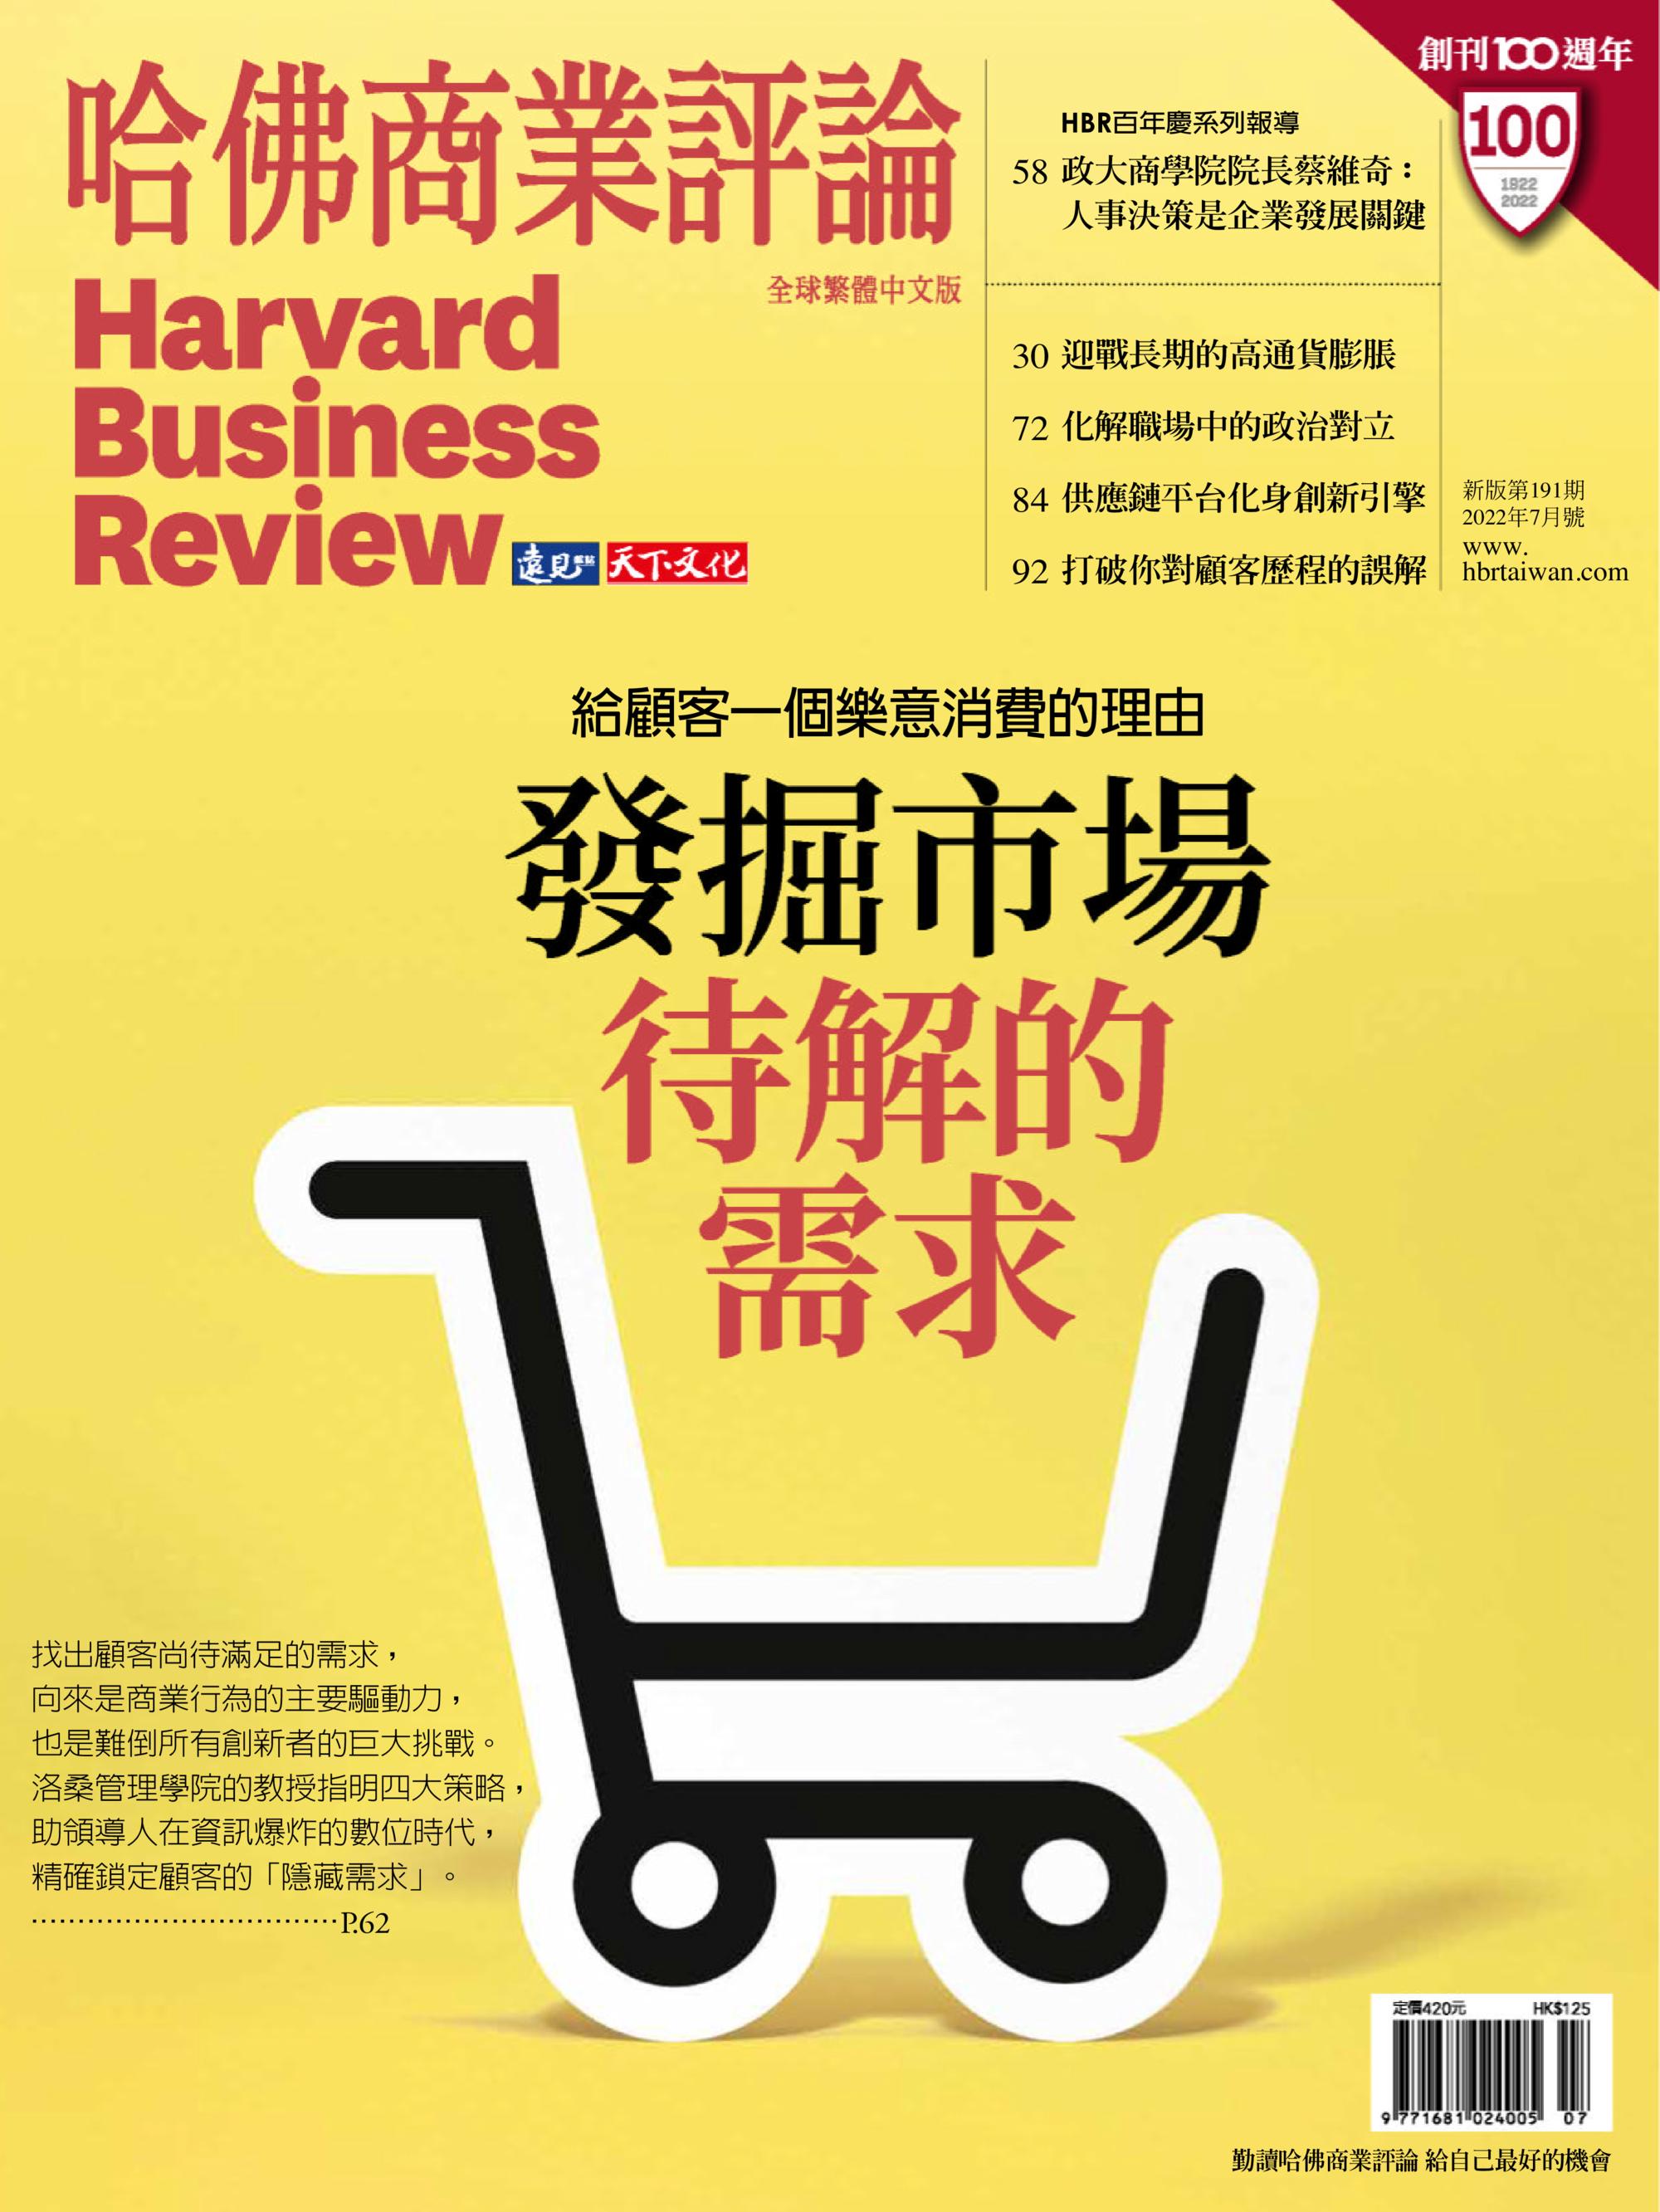 Harvard Business Review Complex Chinese Edition 哈佛商業評論 - 七月 2022